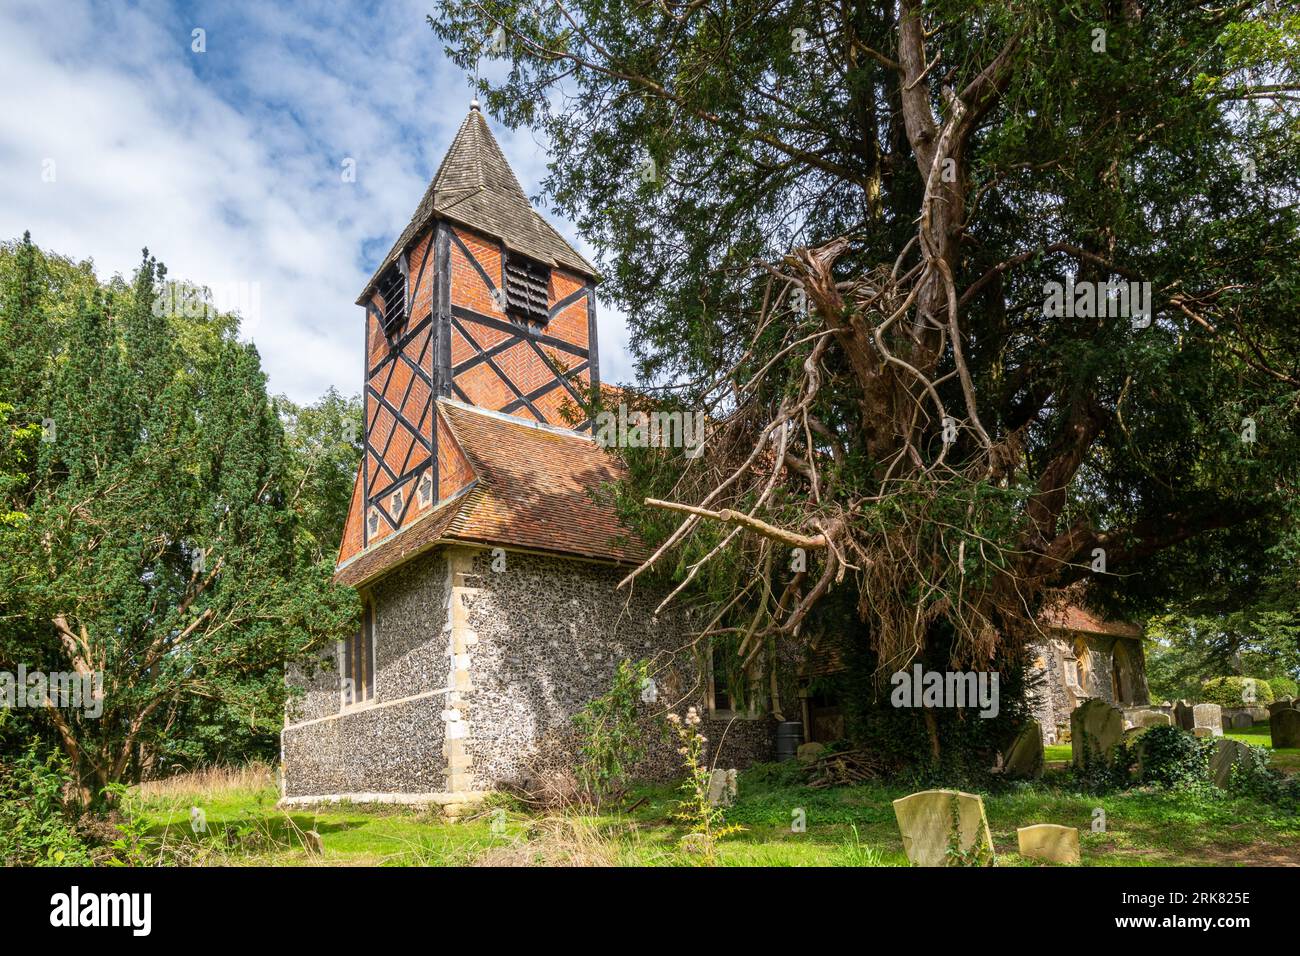 All Saints Church, a grade I listed building in Swallowfield village, Berkshire, England, UK, dating from the 12th century Stock Photo